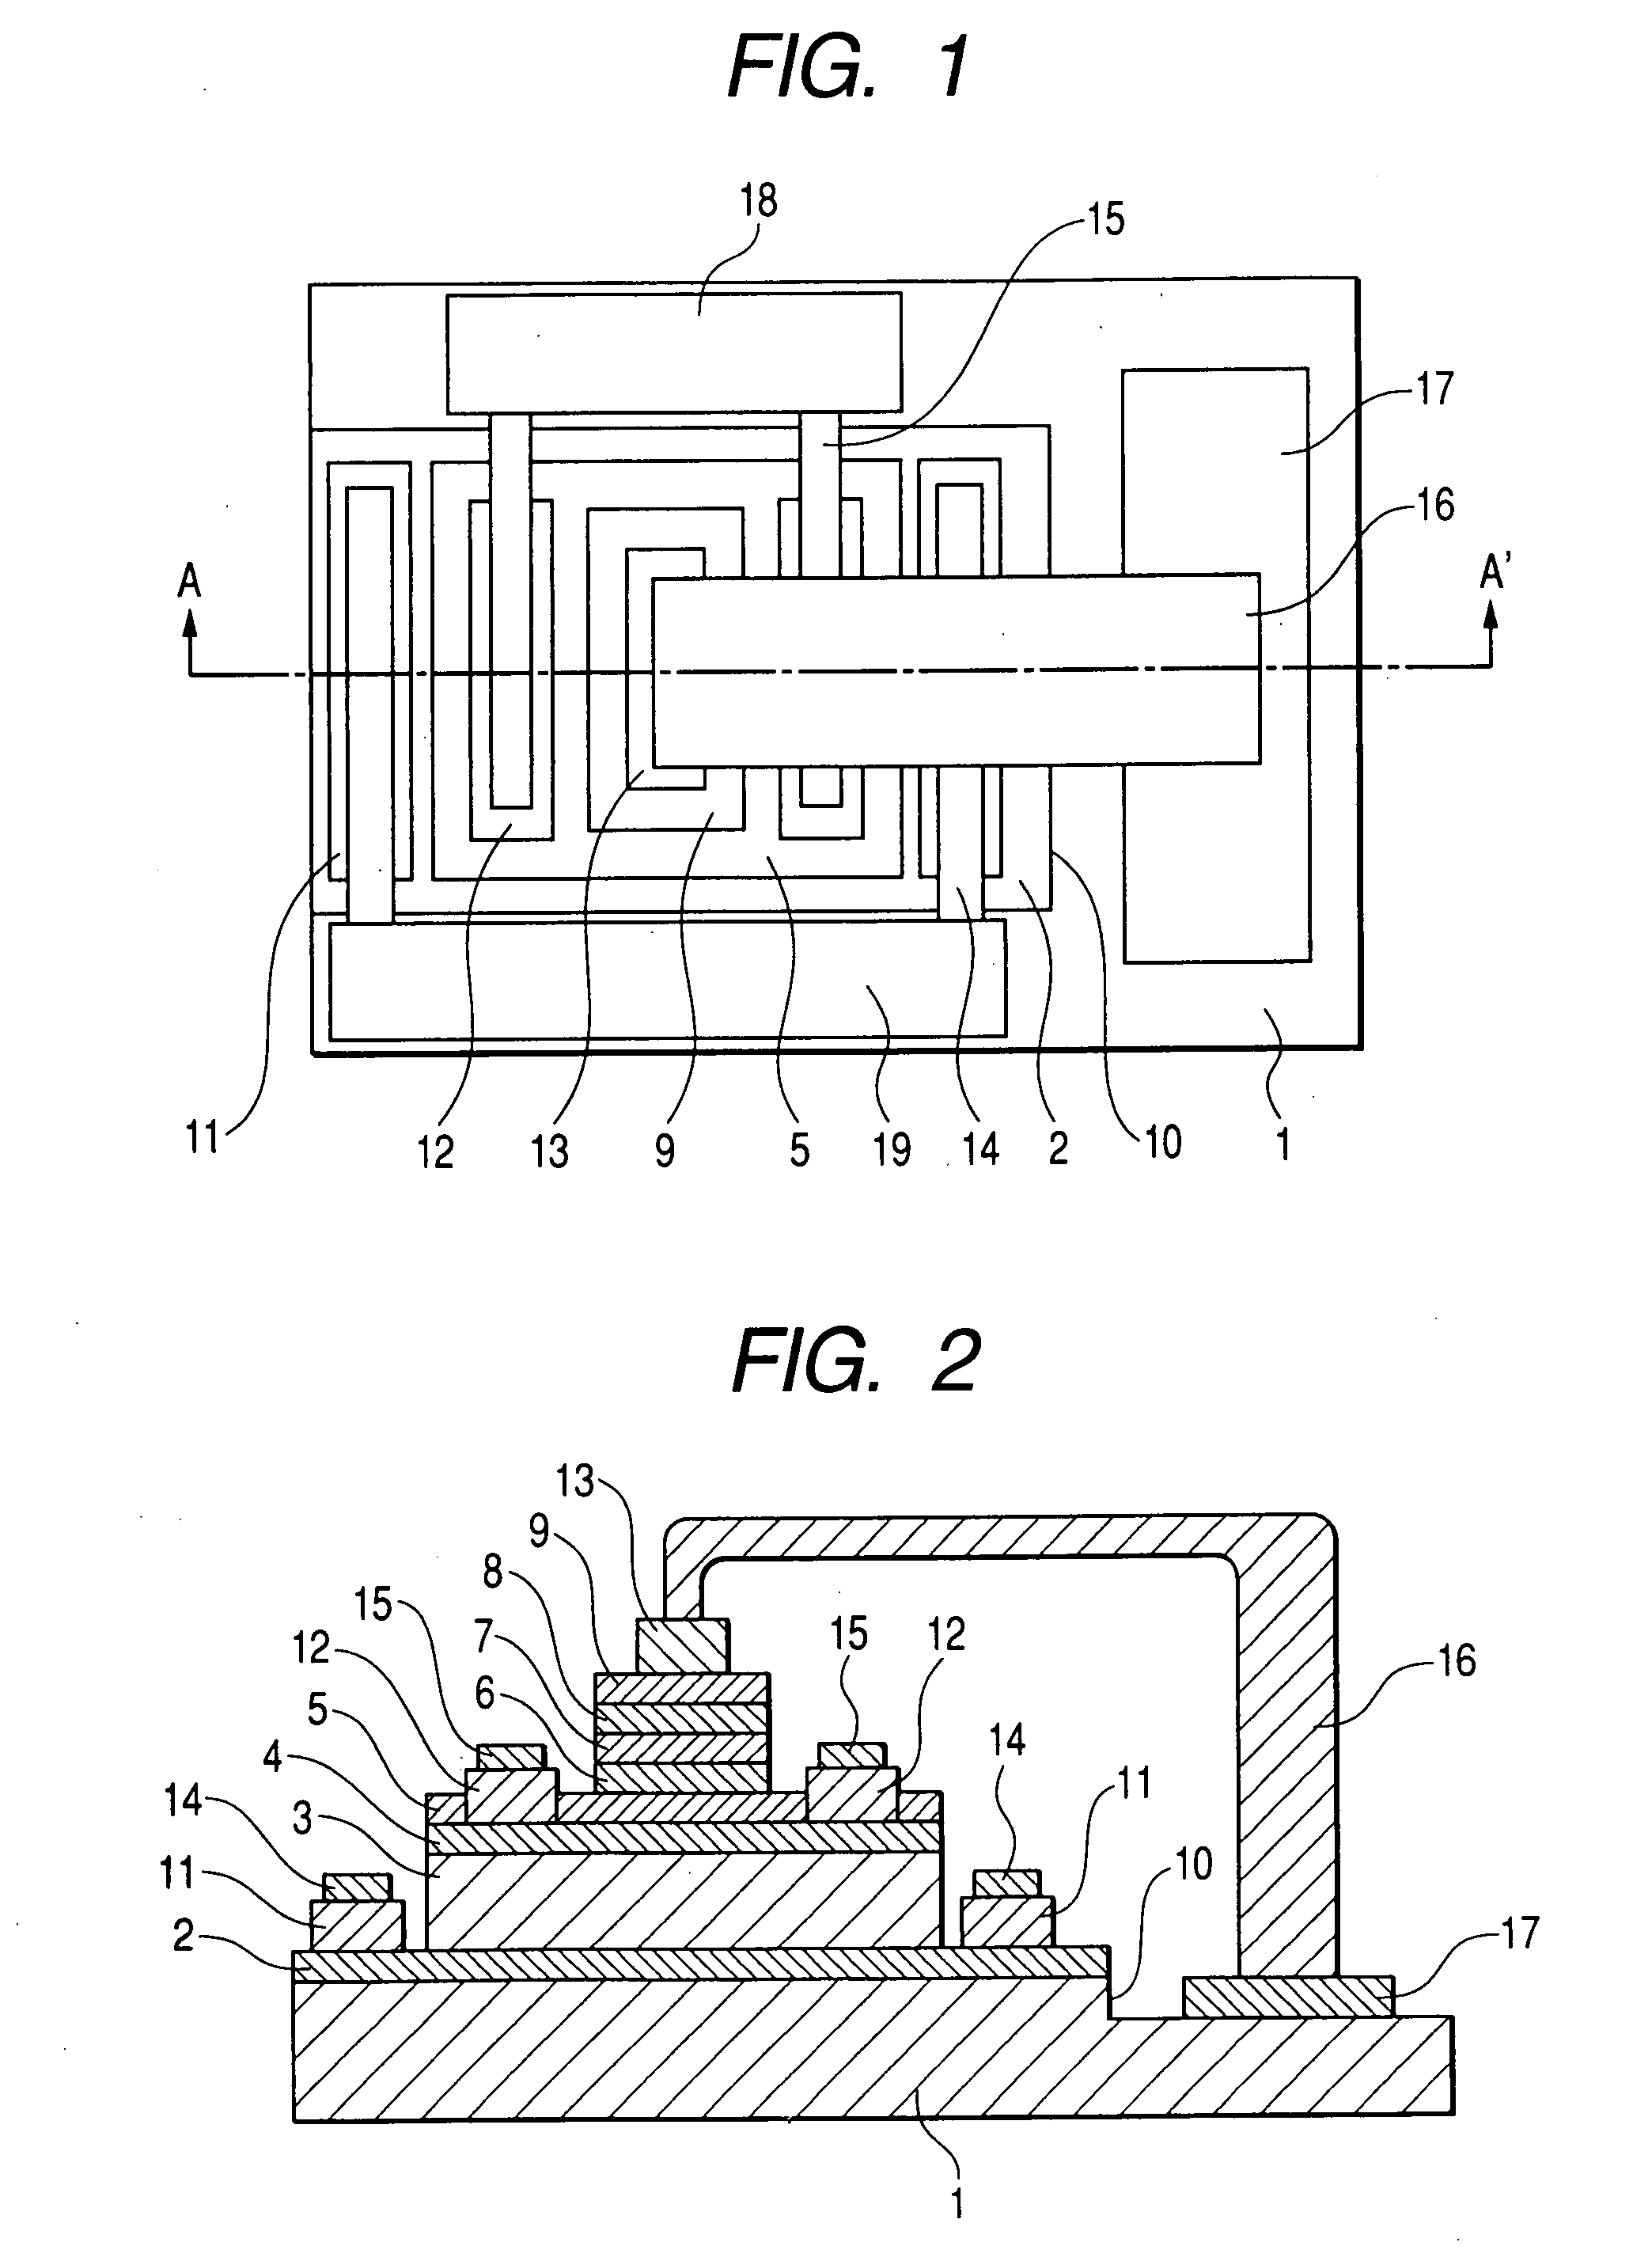 Heterojunction bipolar transistor and method for manufacturing the same, and power amplifier using the same